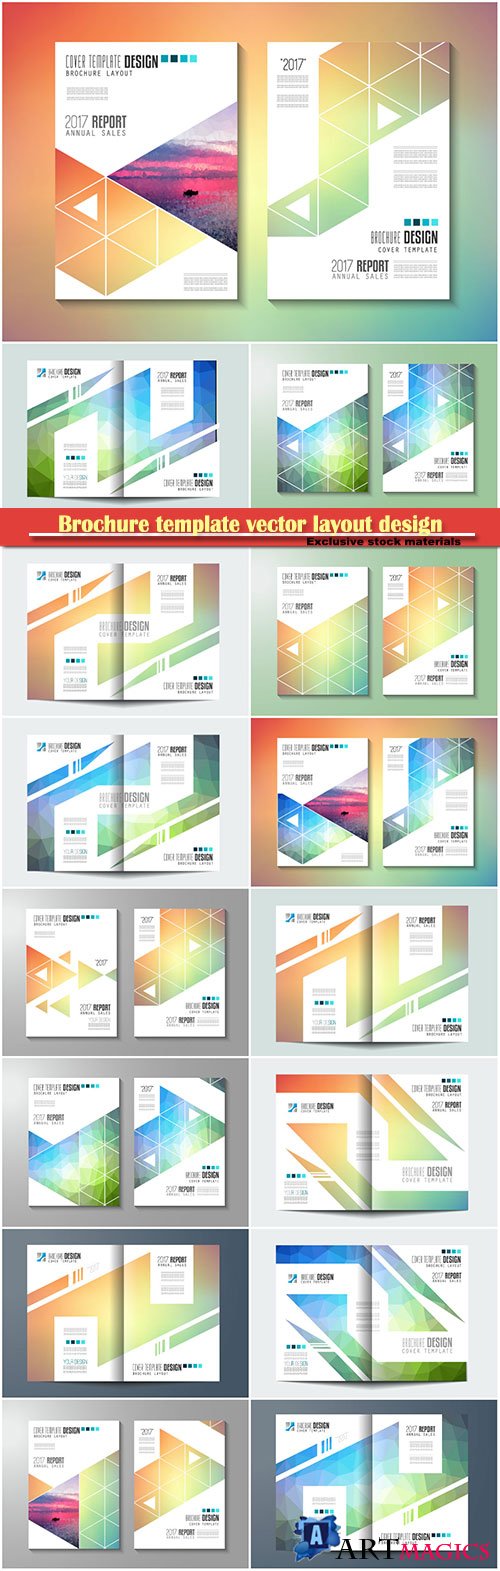 Brochure template vector layout design, corporate business annual report, magazine, flyer mockup # 128